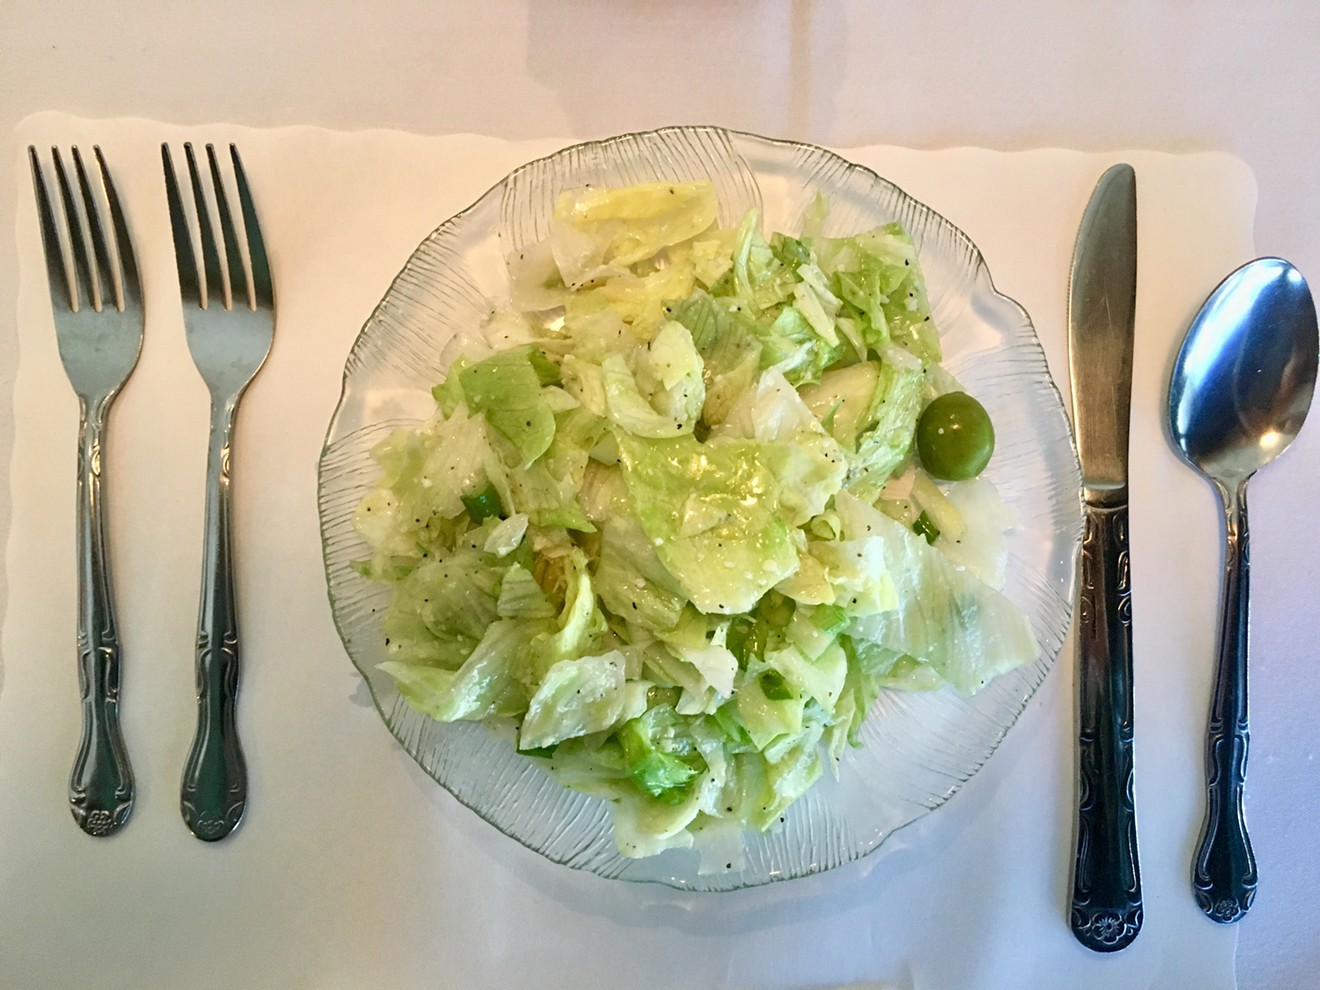 The green salad that you know at Prego Pasta House.